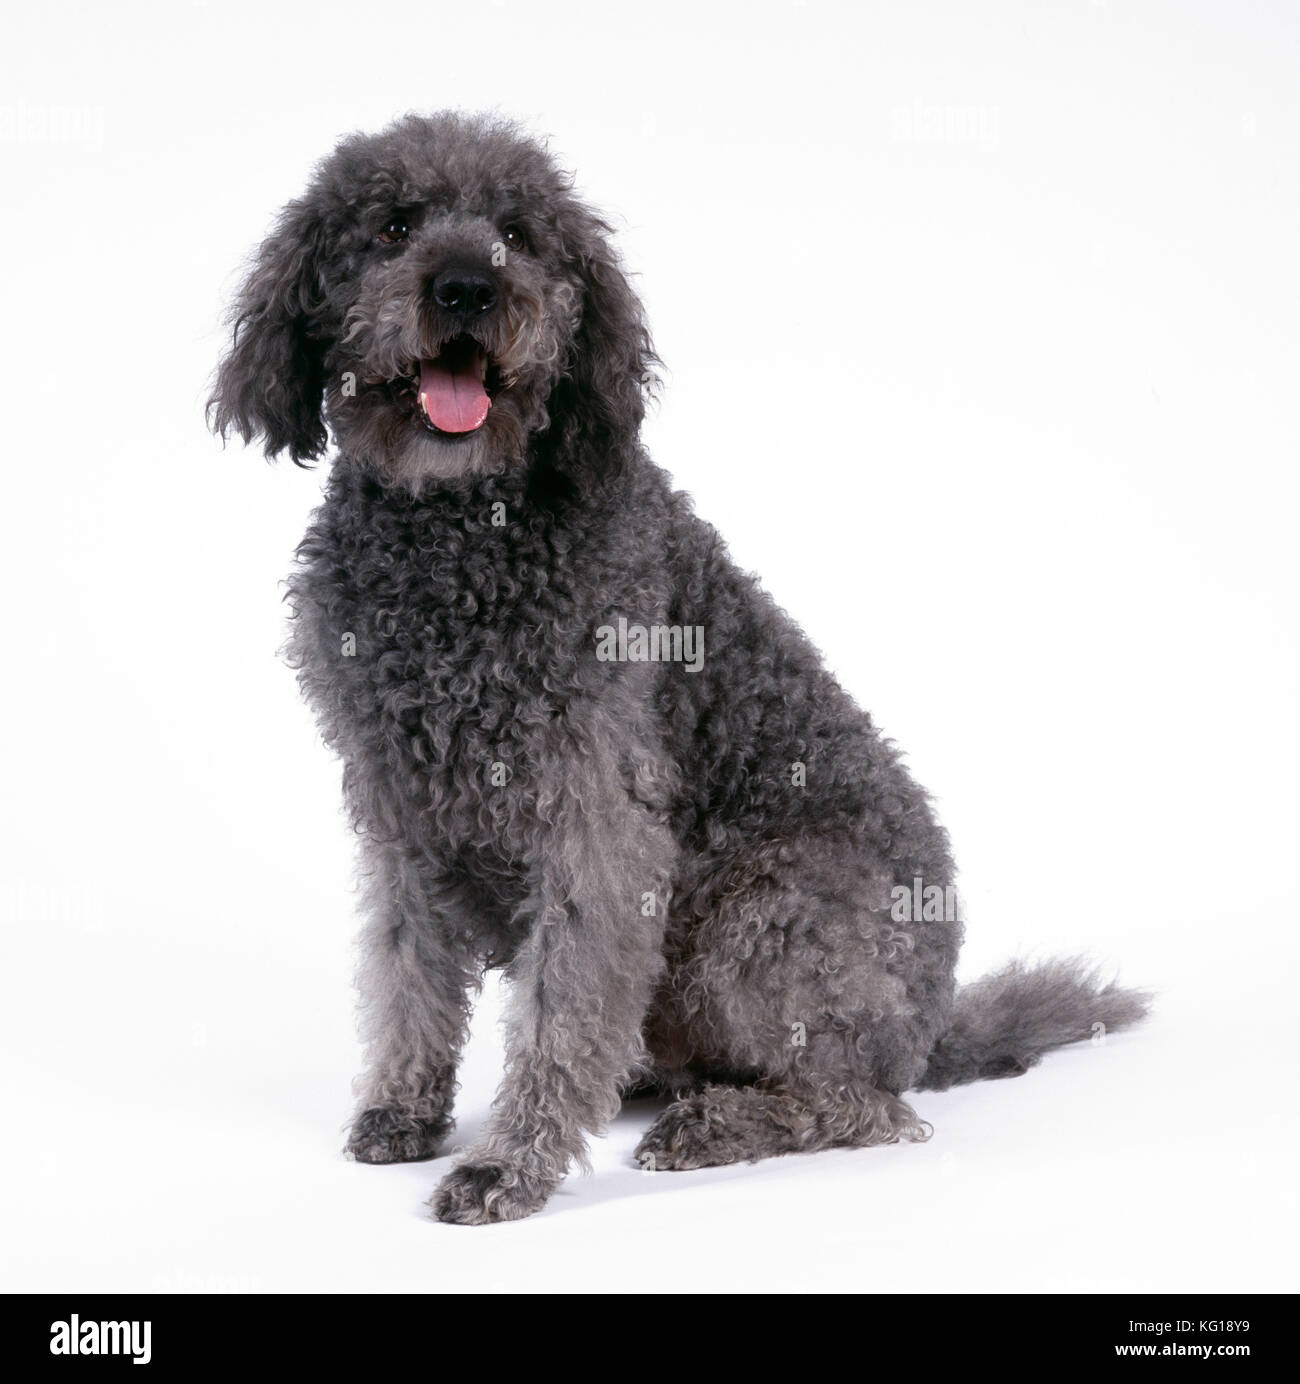 DOG - Labradoodle sitting. A Labrador and Poodle cross. Stock Photo